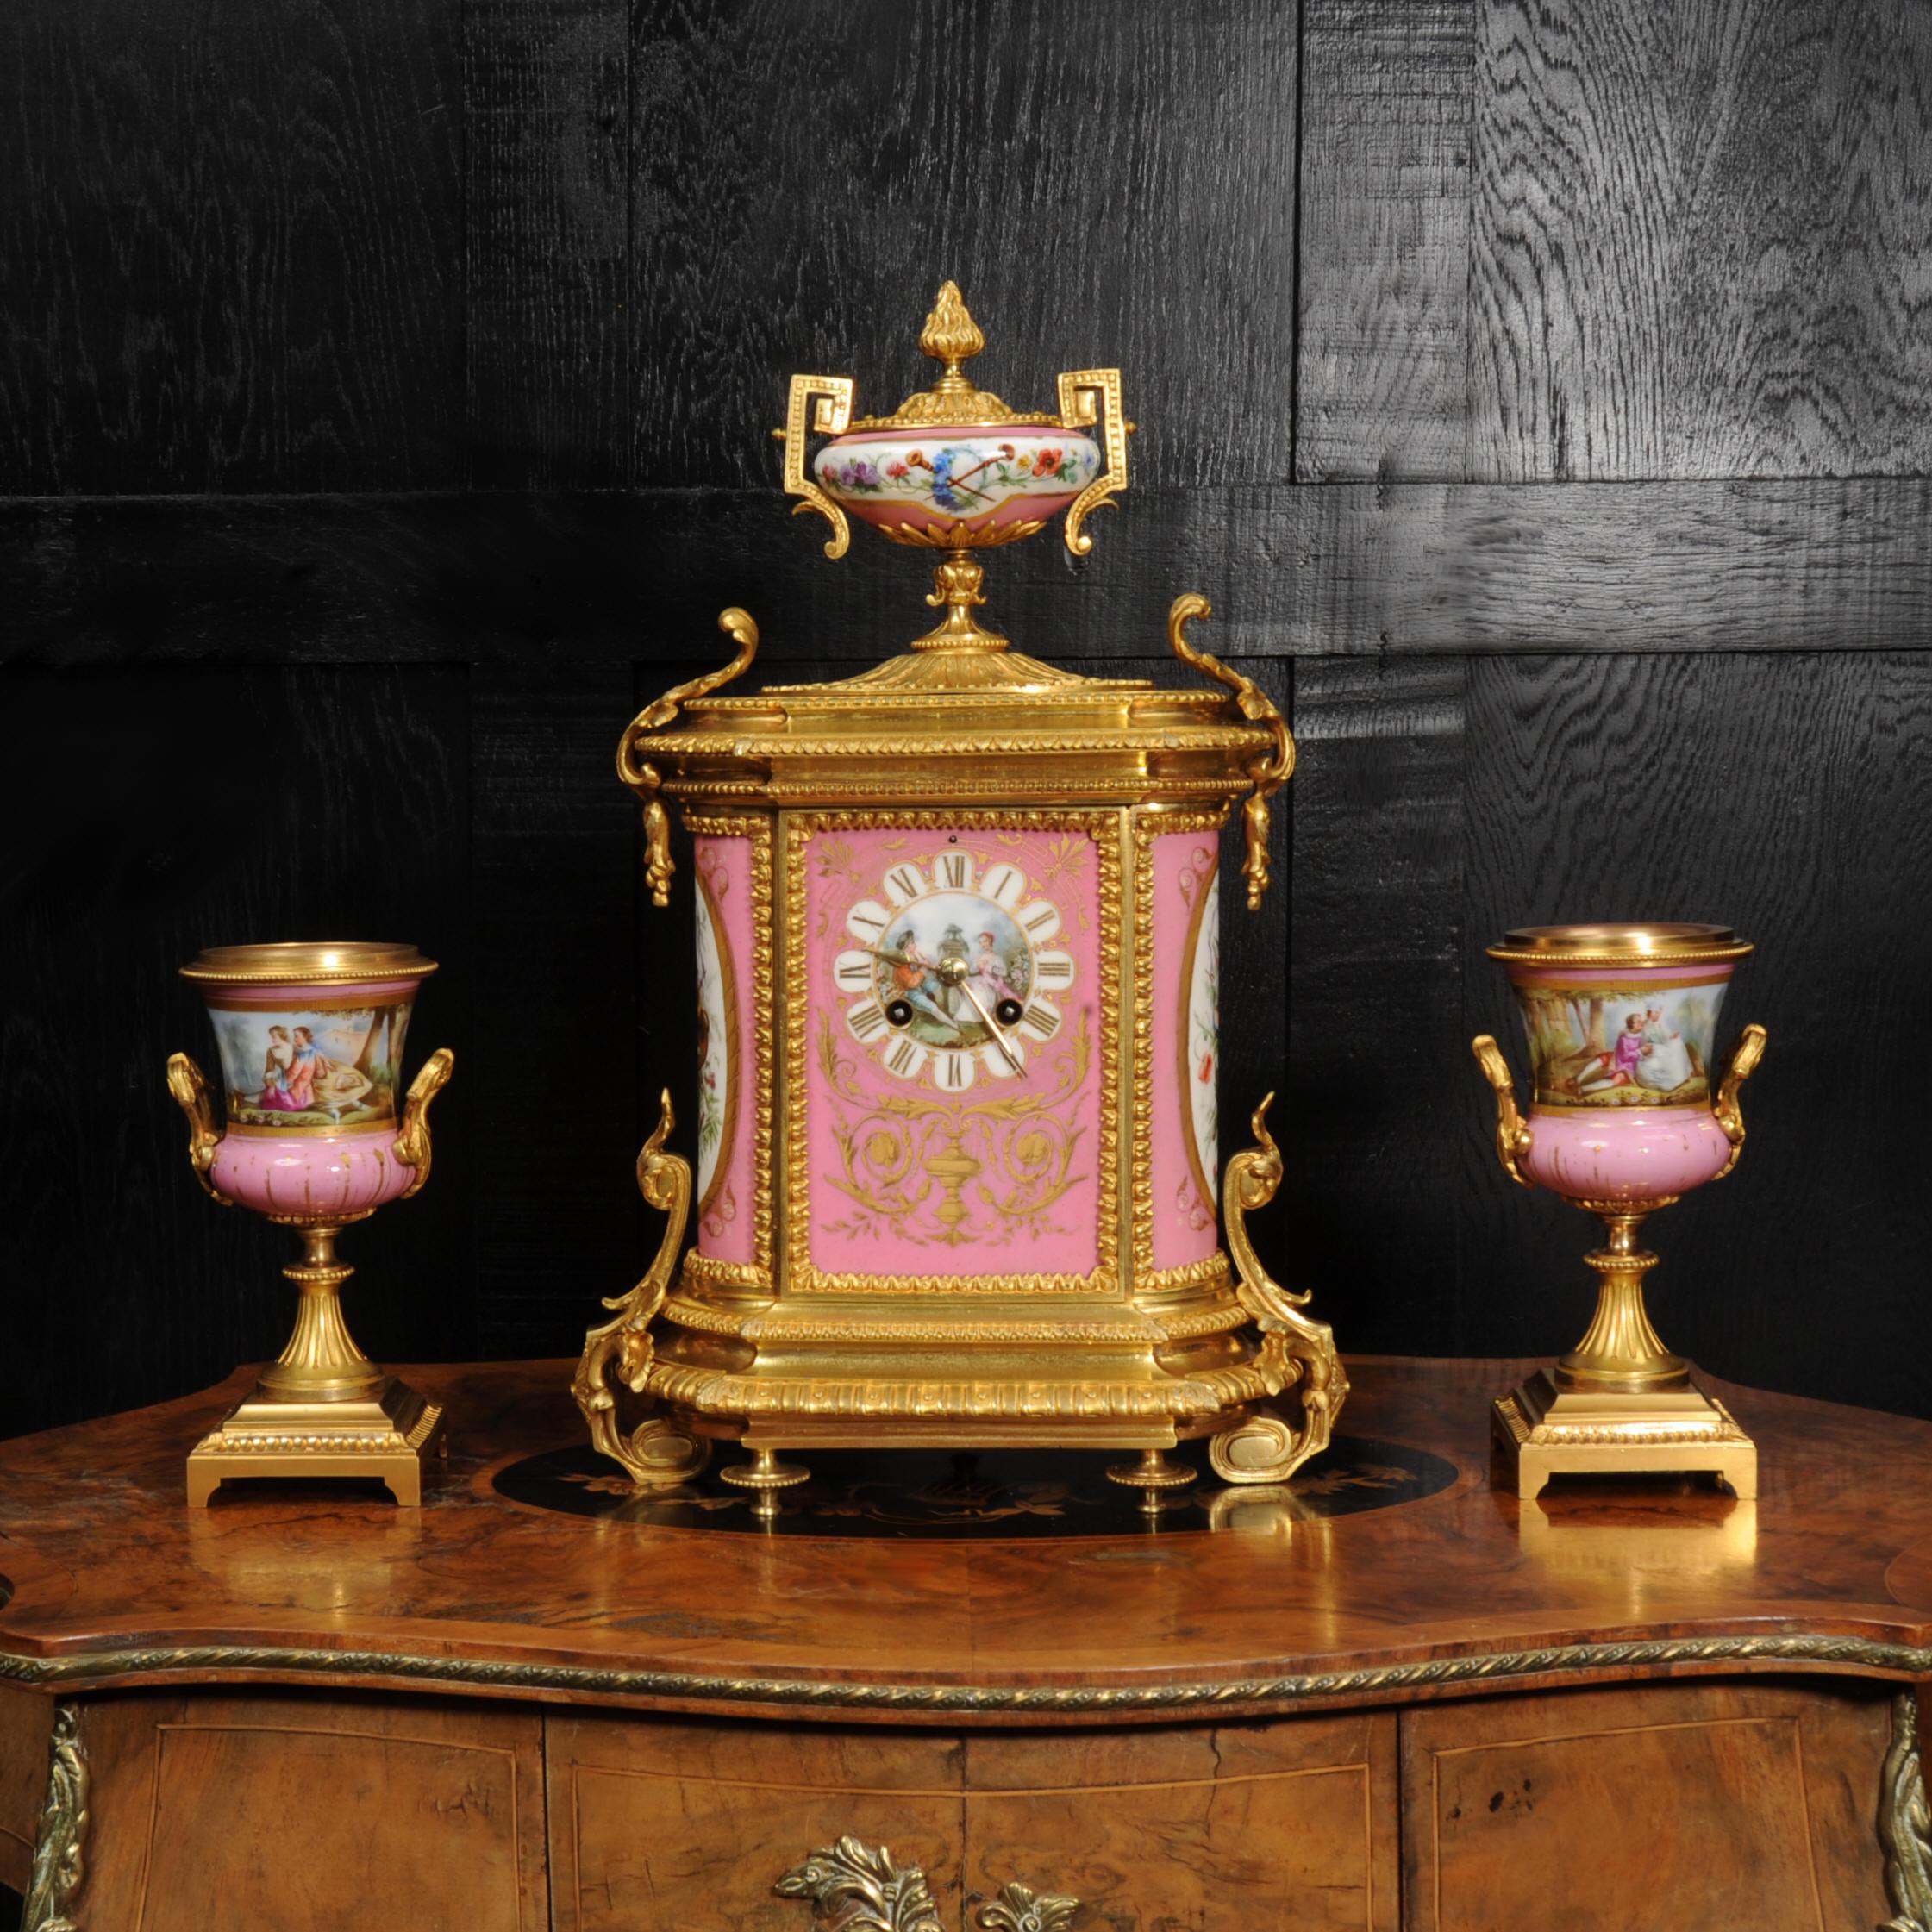 A stunning antique French ormolu clock set, circa 1870, mounted with exquisite Sèvres style porcelain with Rose Pompadour pink ground. Panels to the centre of the dial and the urns feature finely painted scenes of a young couple in a tranquil